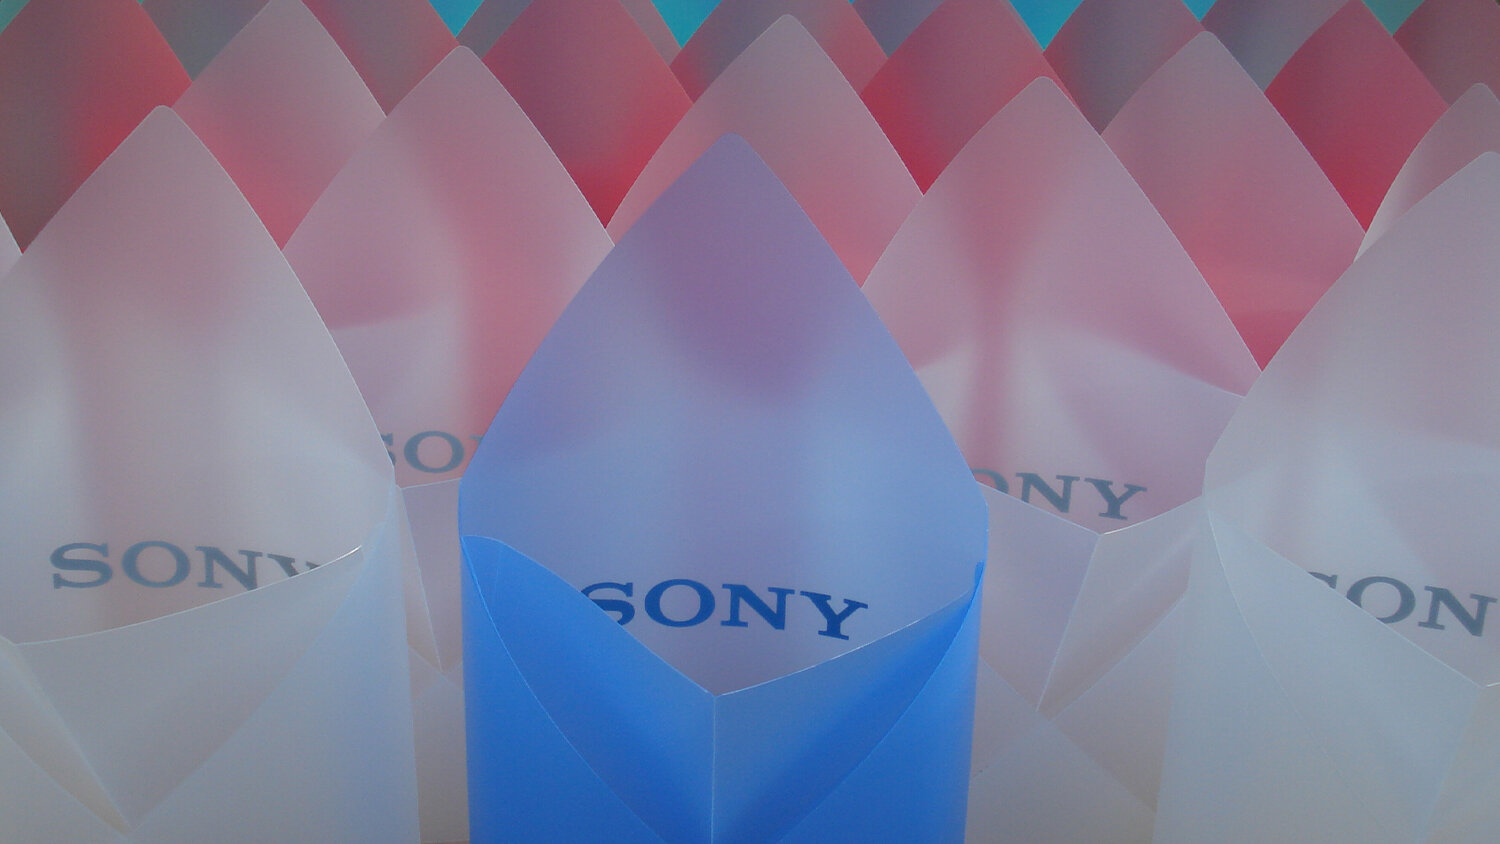 Blue-Marmalade-Made-to-order-branded-products-Sony-Polyrap-recycled-plastic-paper-bin-recyclable.jpg